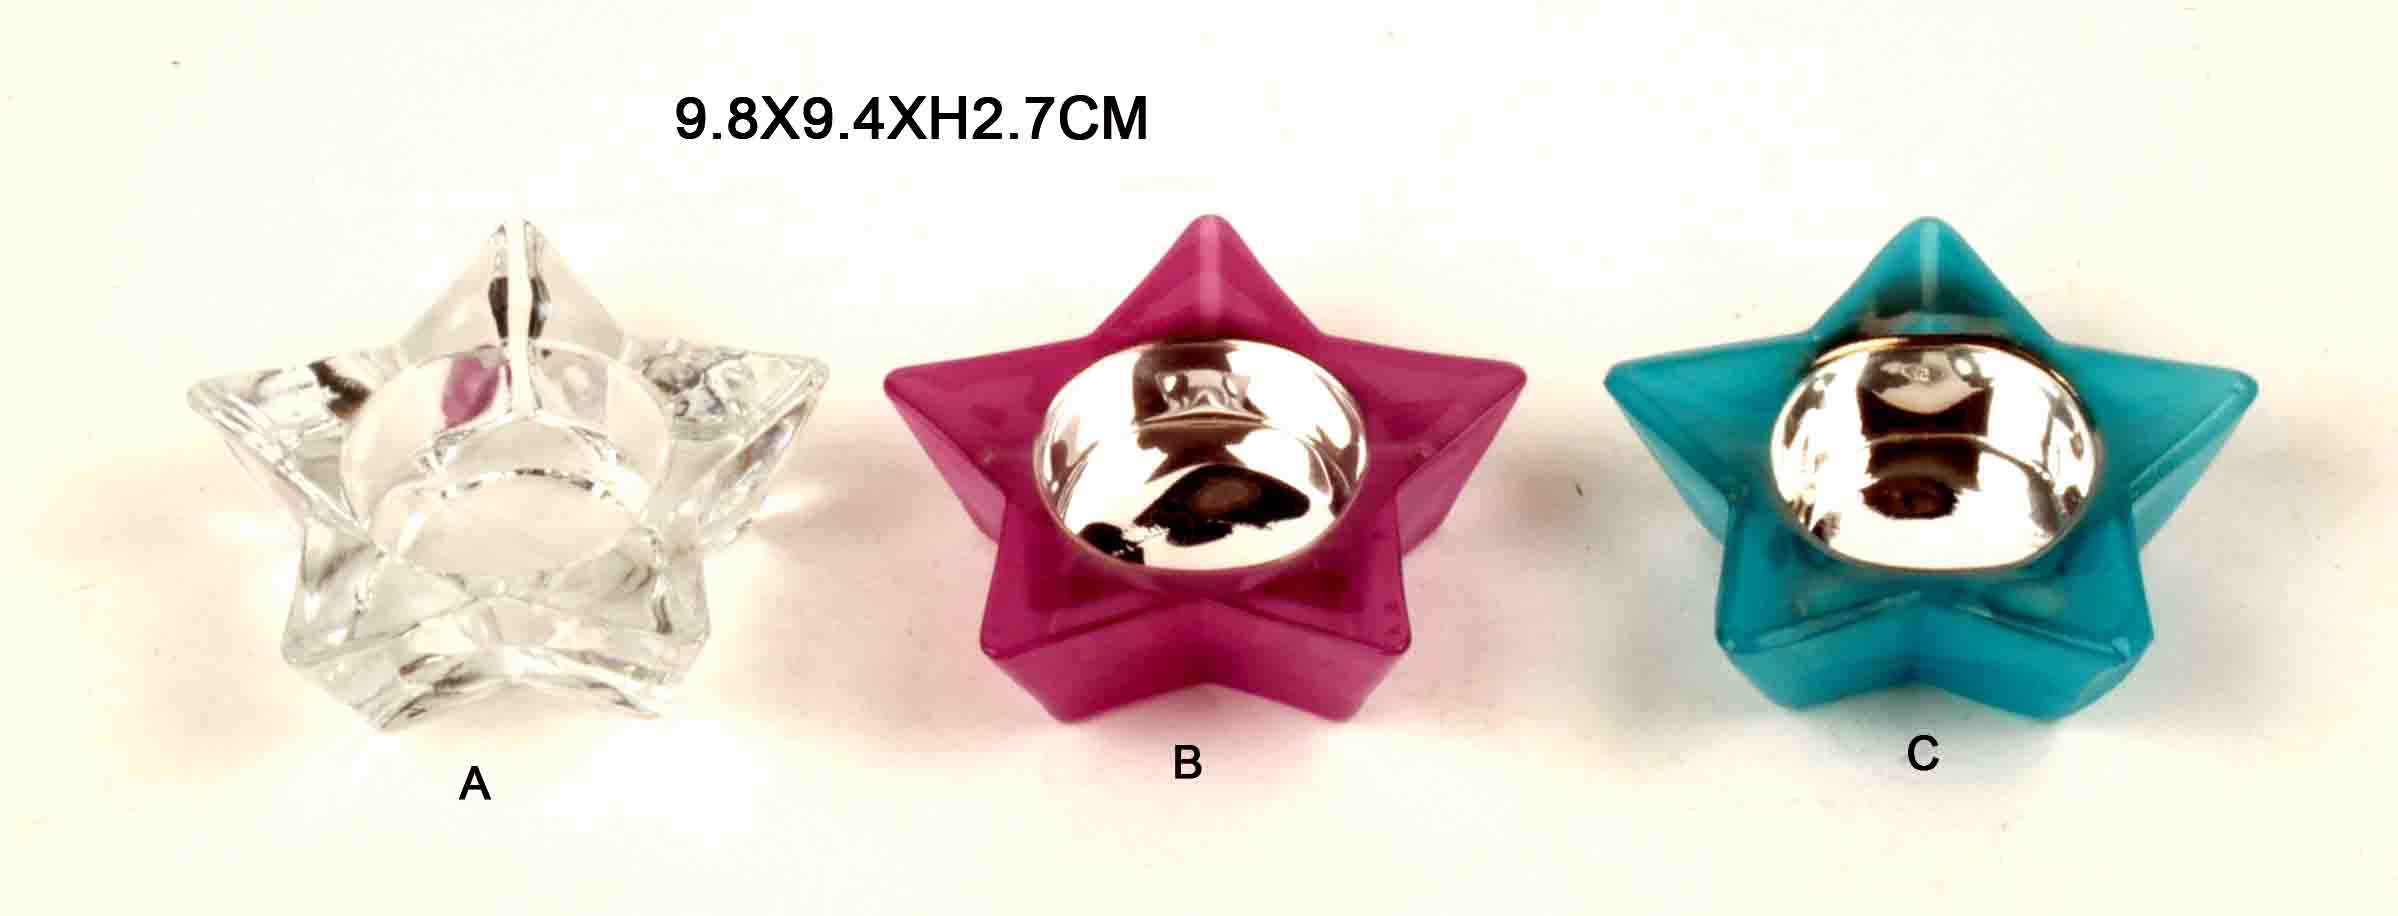 Colored Star-shaped Candle Holers